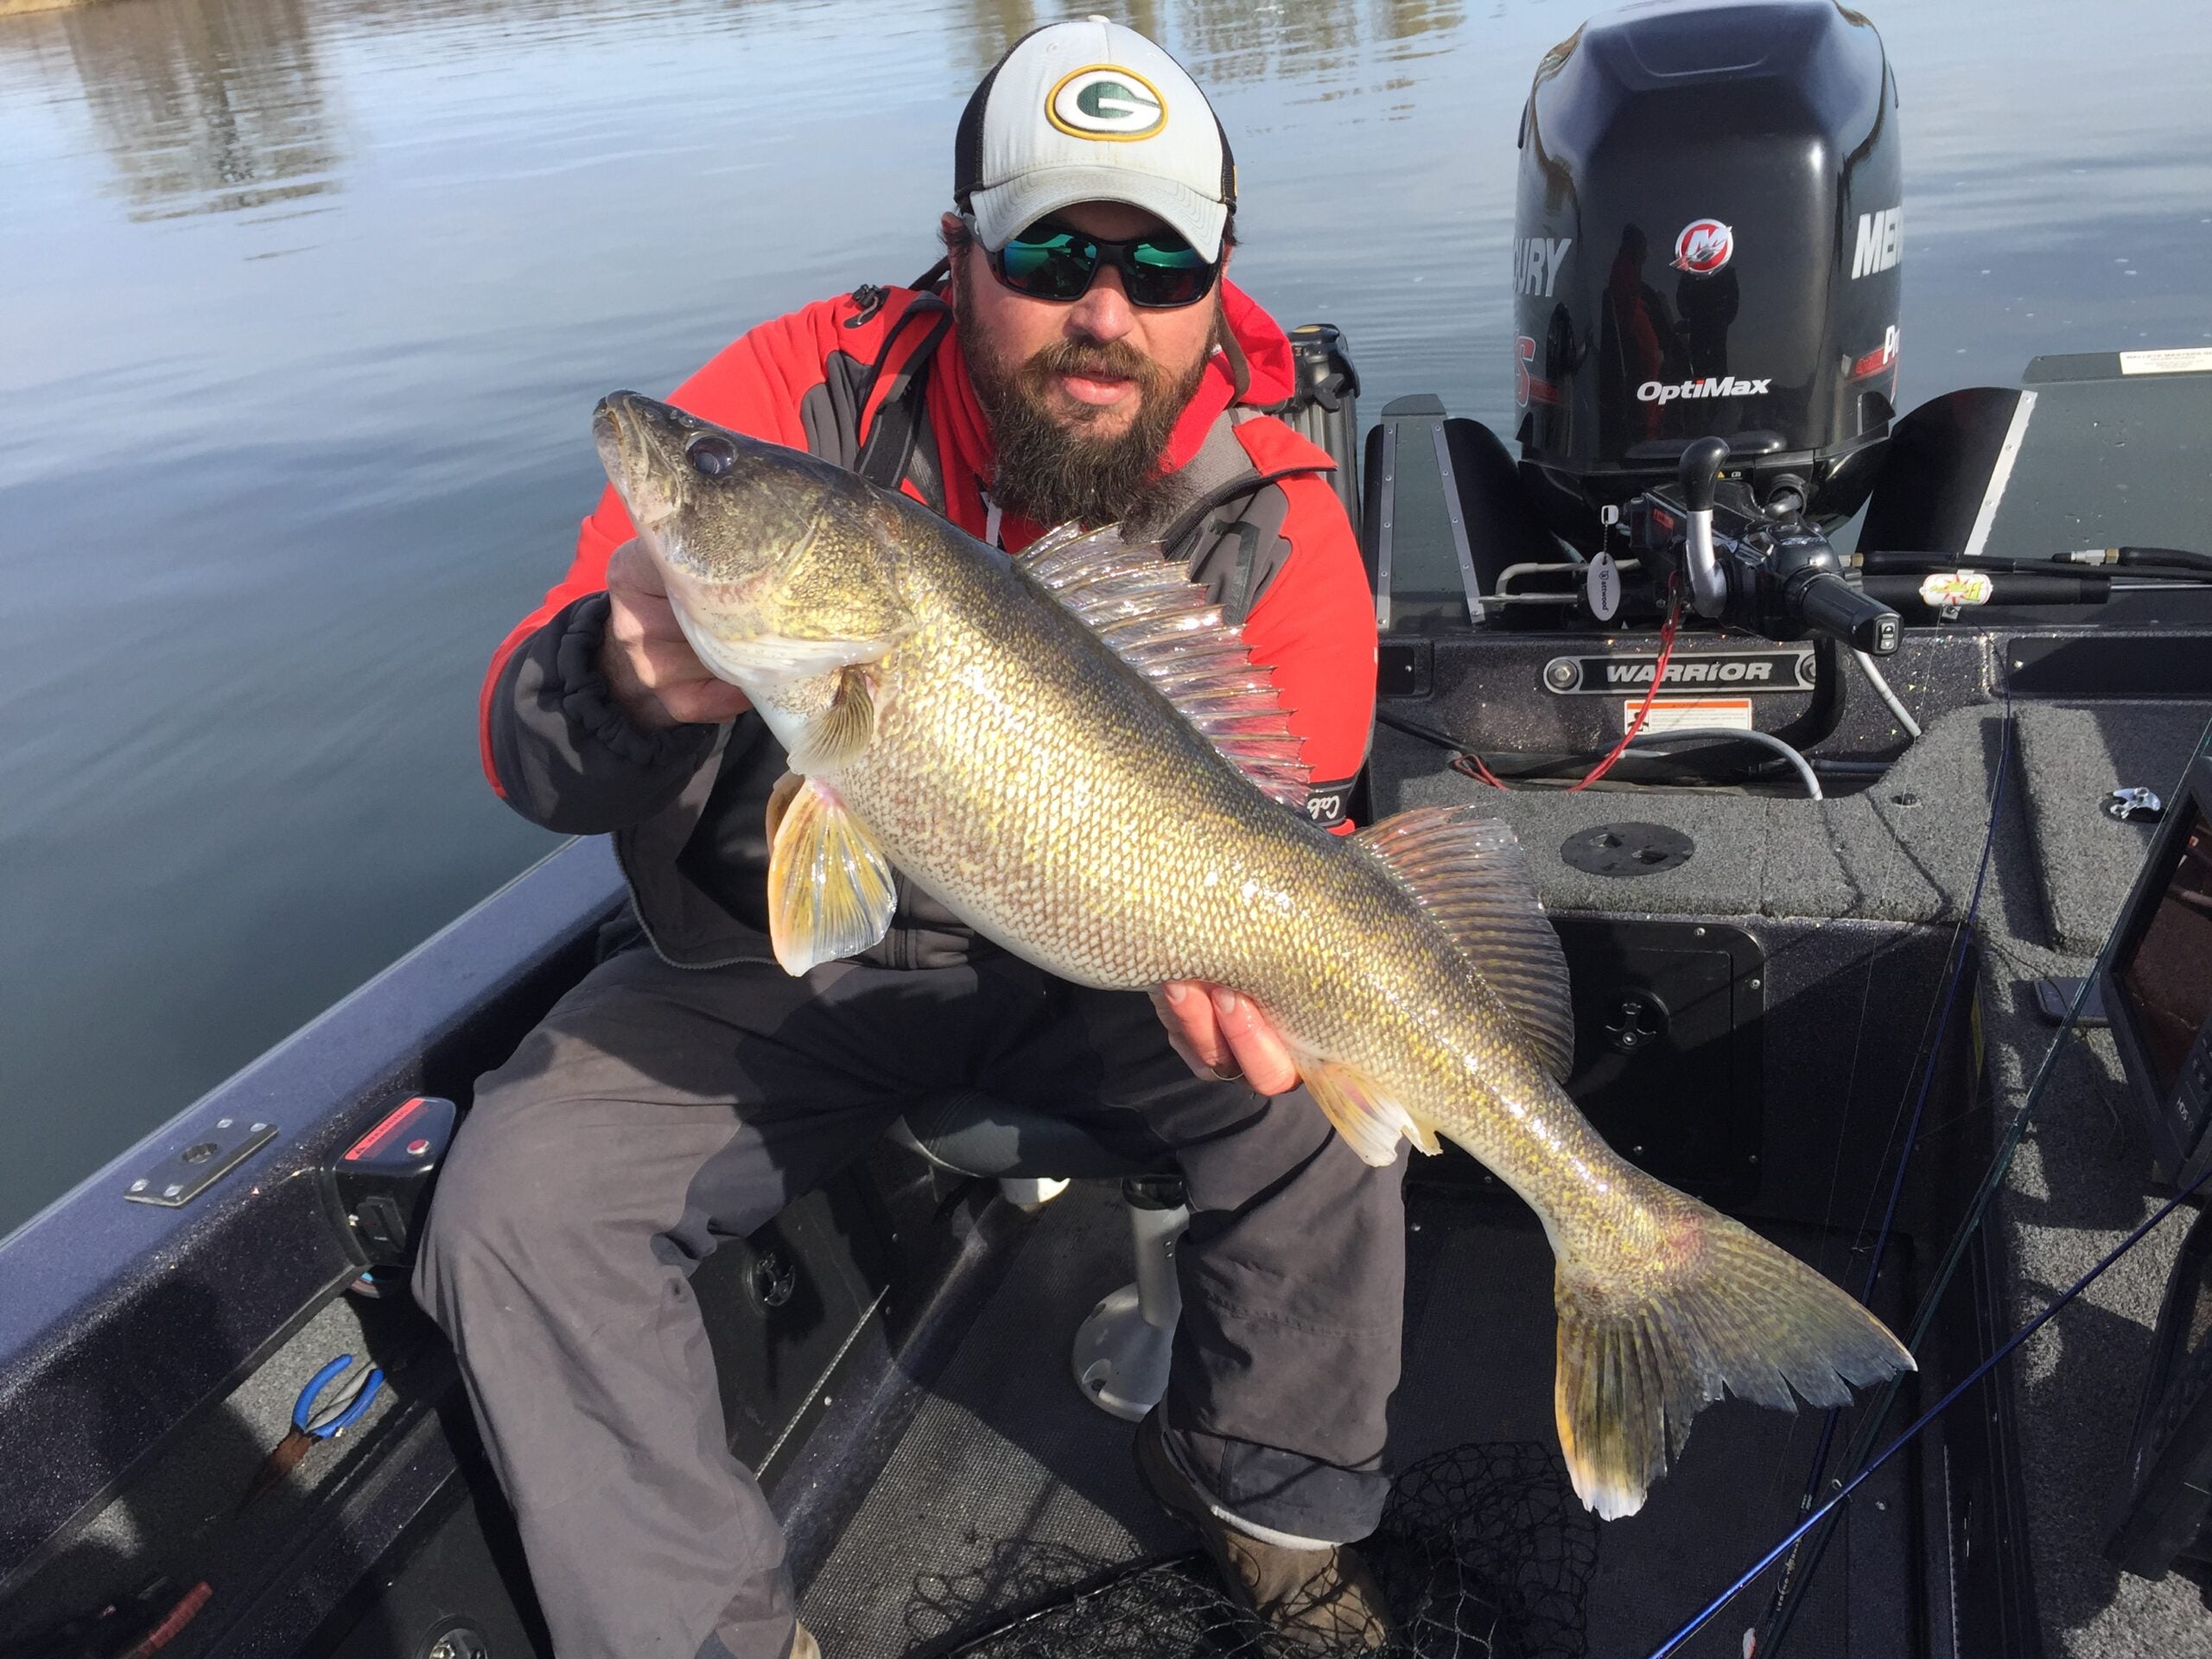 An angler shows off a trophy walleye he caught